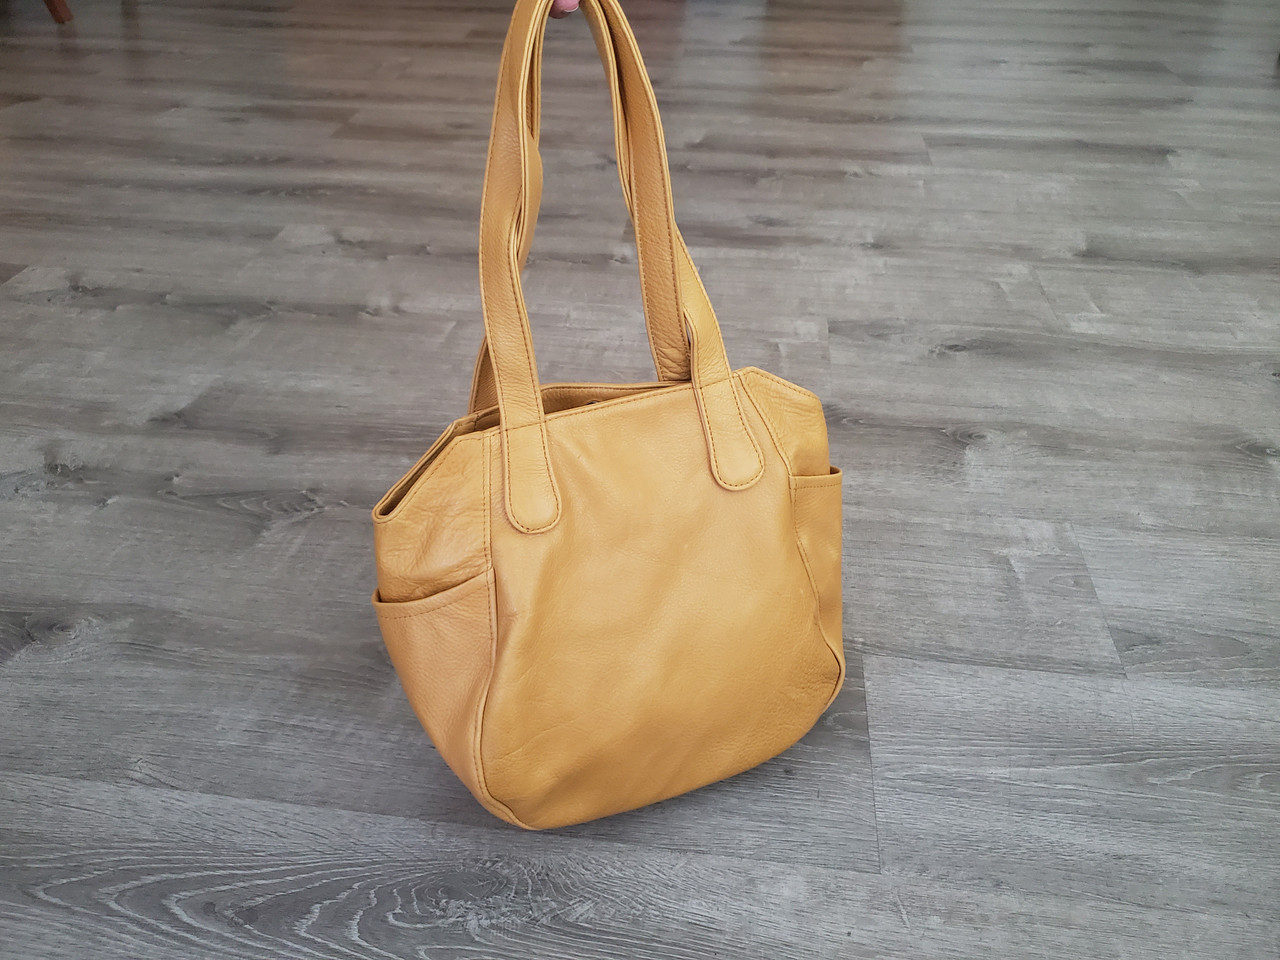 Chala Yellow Italian Soft Leather Tote Bag, Stylish and Functional Purse,  Shoulder Bag, Trendy Shoulder Bag Gift for Her